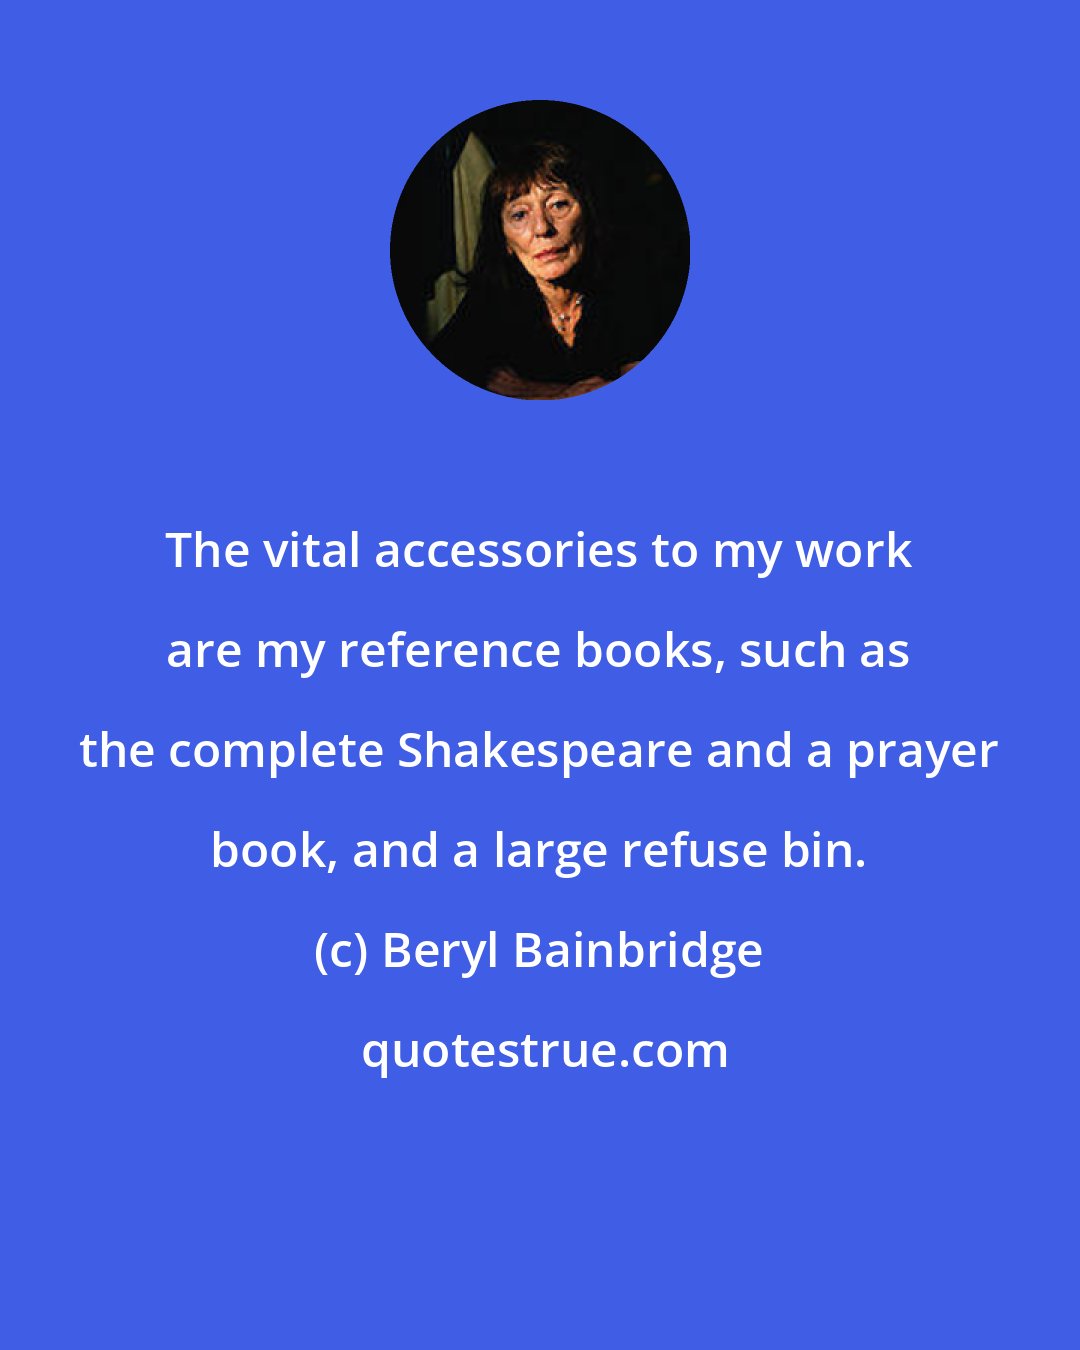 Beryl Bainbridge: The vital accessories to my work are my reference books, such as the complete Shakespeare and a prayer book, and a large refuse bin.